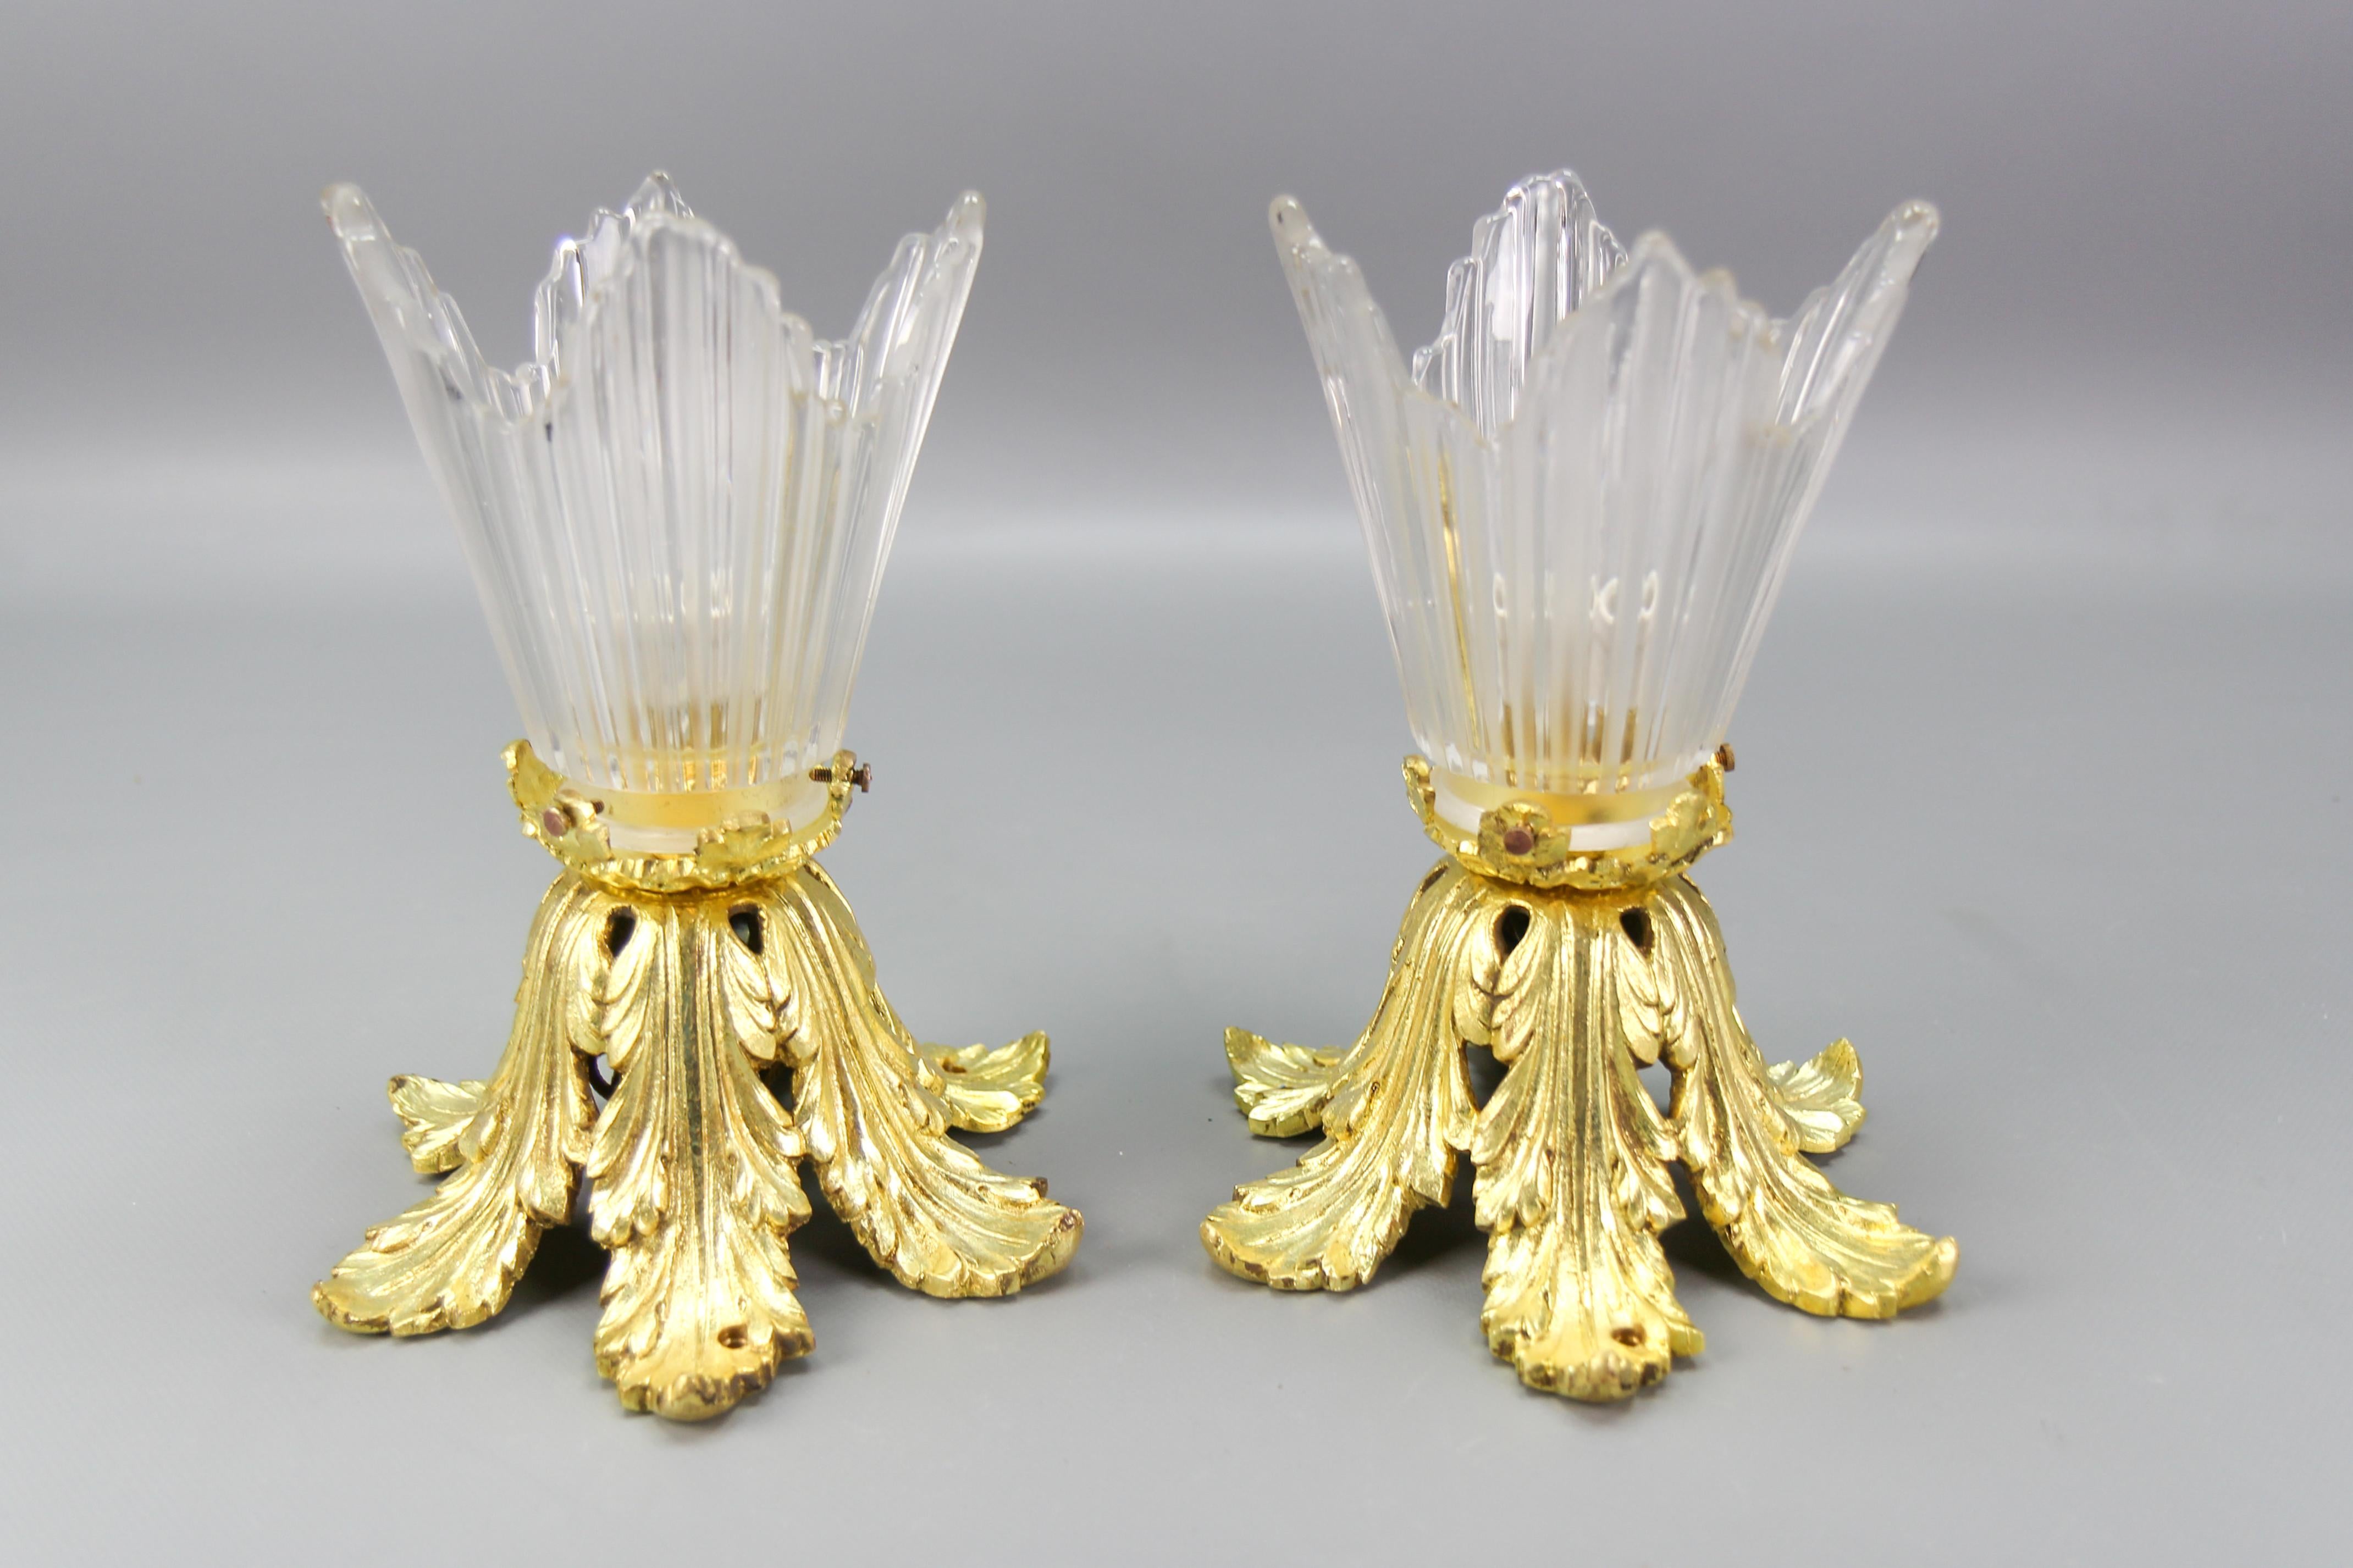 Pair of French Art Deco gilt bronze and clear glass ceiling lights, the 1920s.
A beautiful pair of French Art Deco period ceiling lights or semi-flush mounts. These adorable light fixtures feature gilt bronze leaf-shaped holders and clear glass